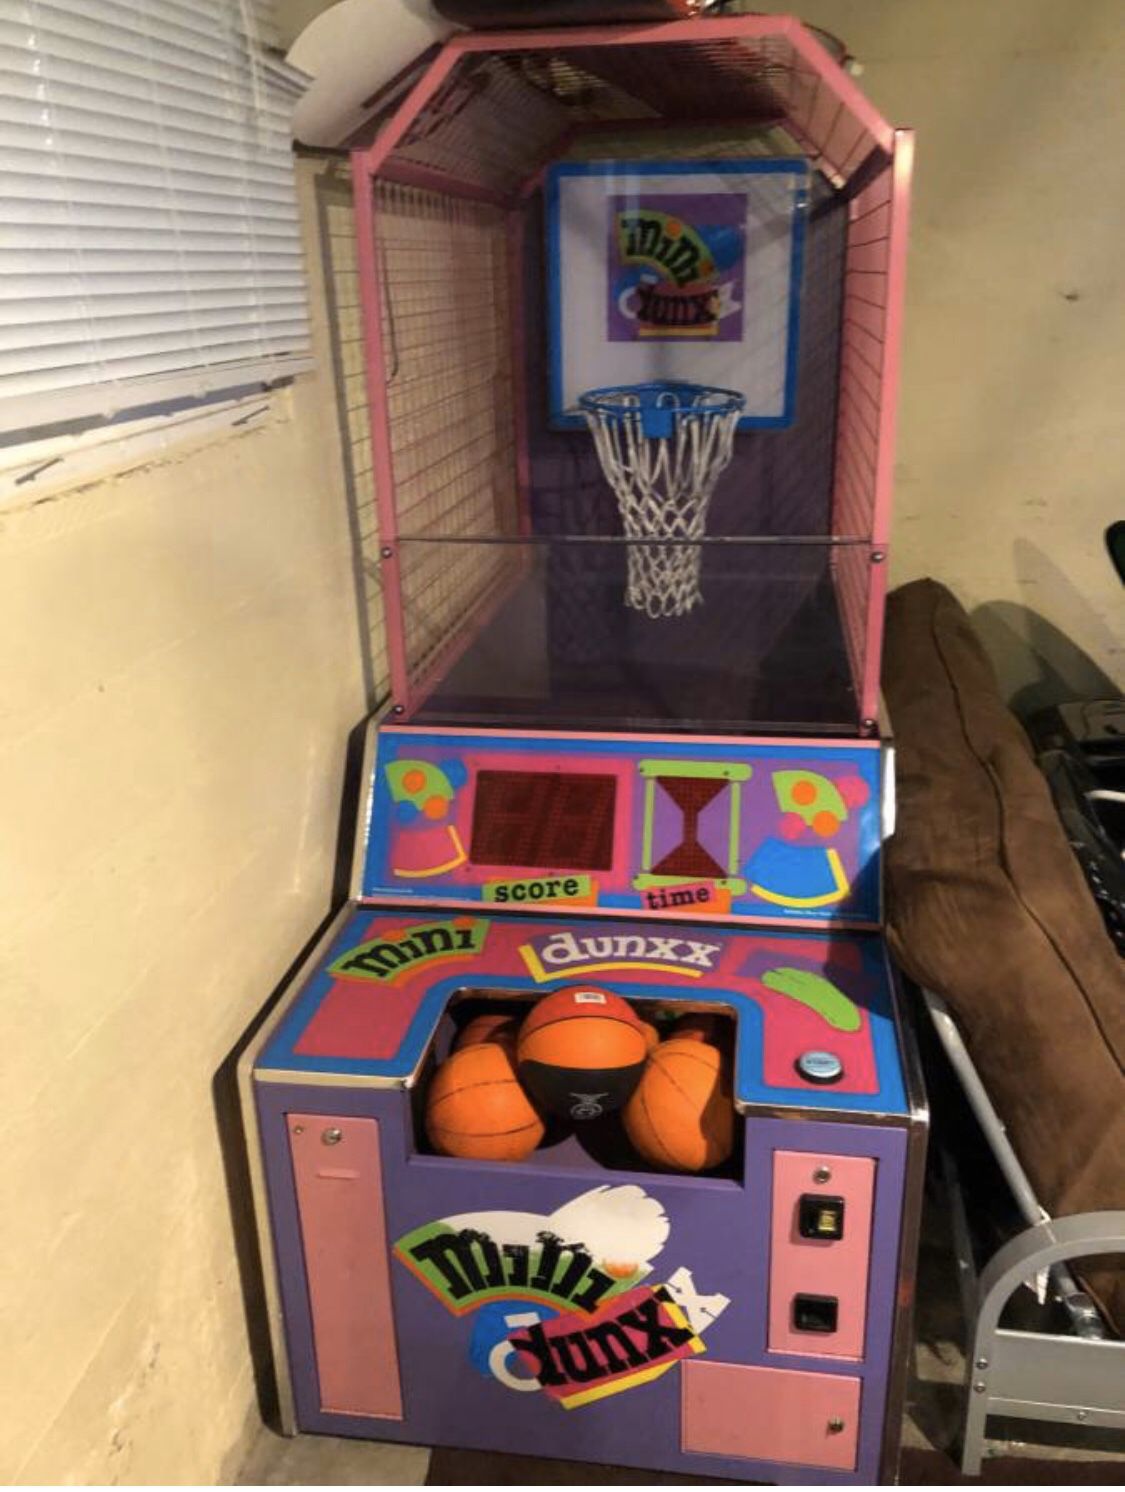 MINI DUNXX ARCADE BASKETBALL GAME W/ MOVING BASKET++Delivery Available - $400 (NORTH TACOMA)